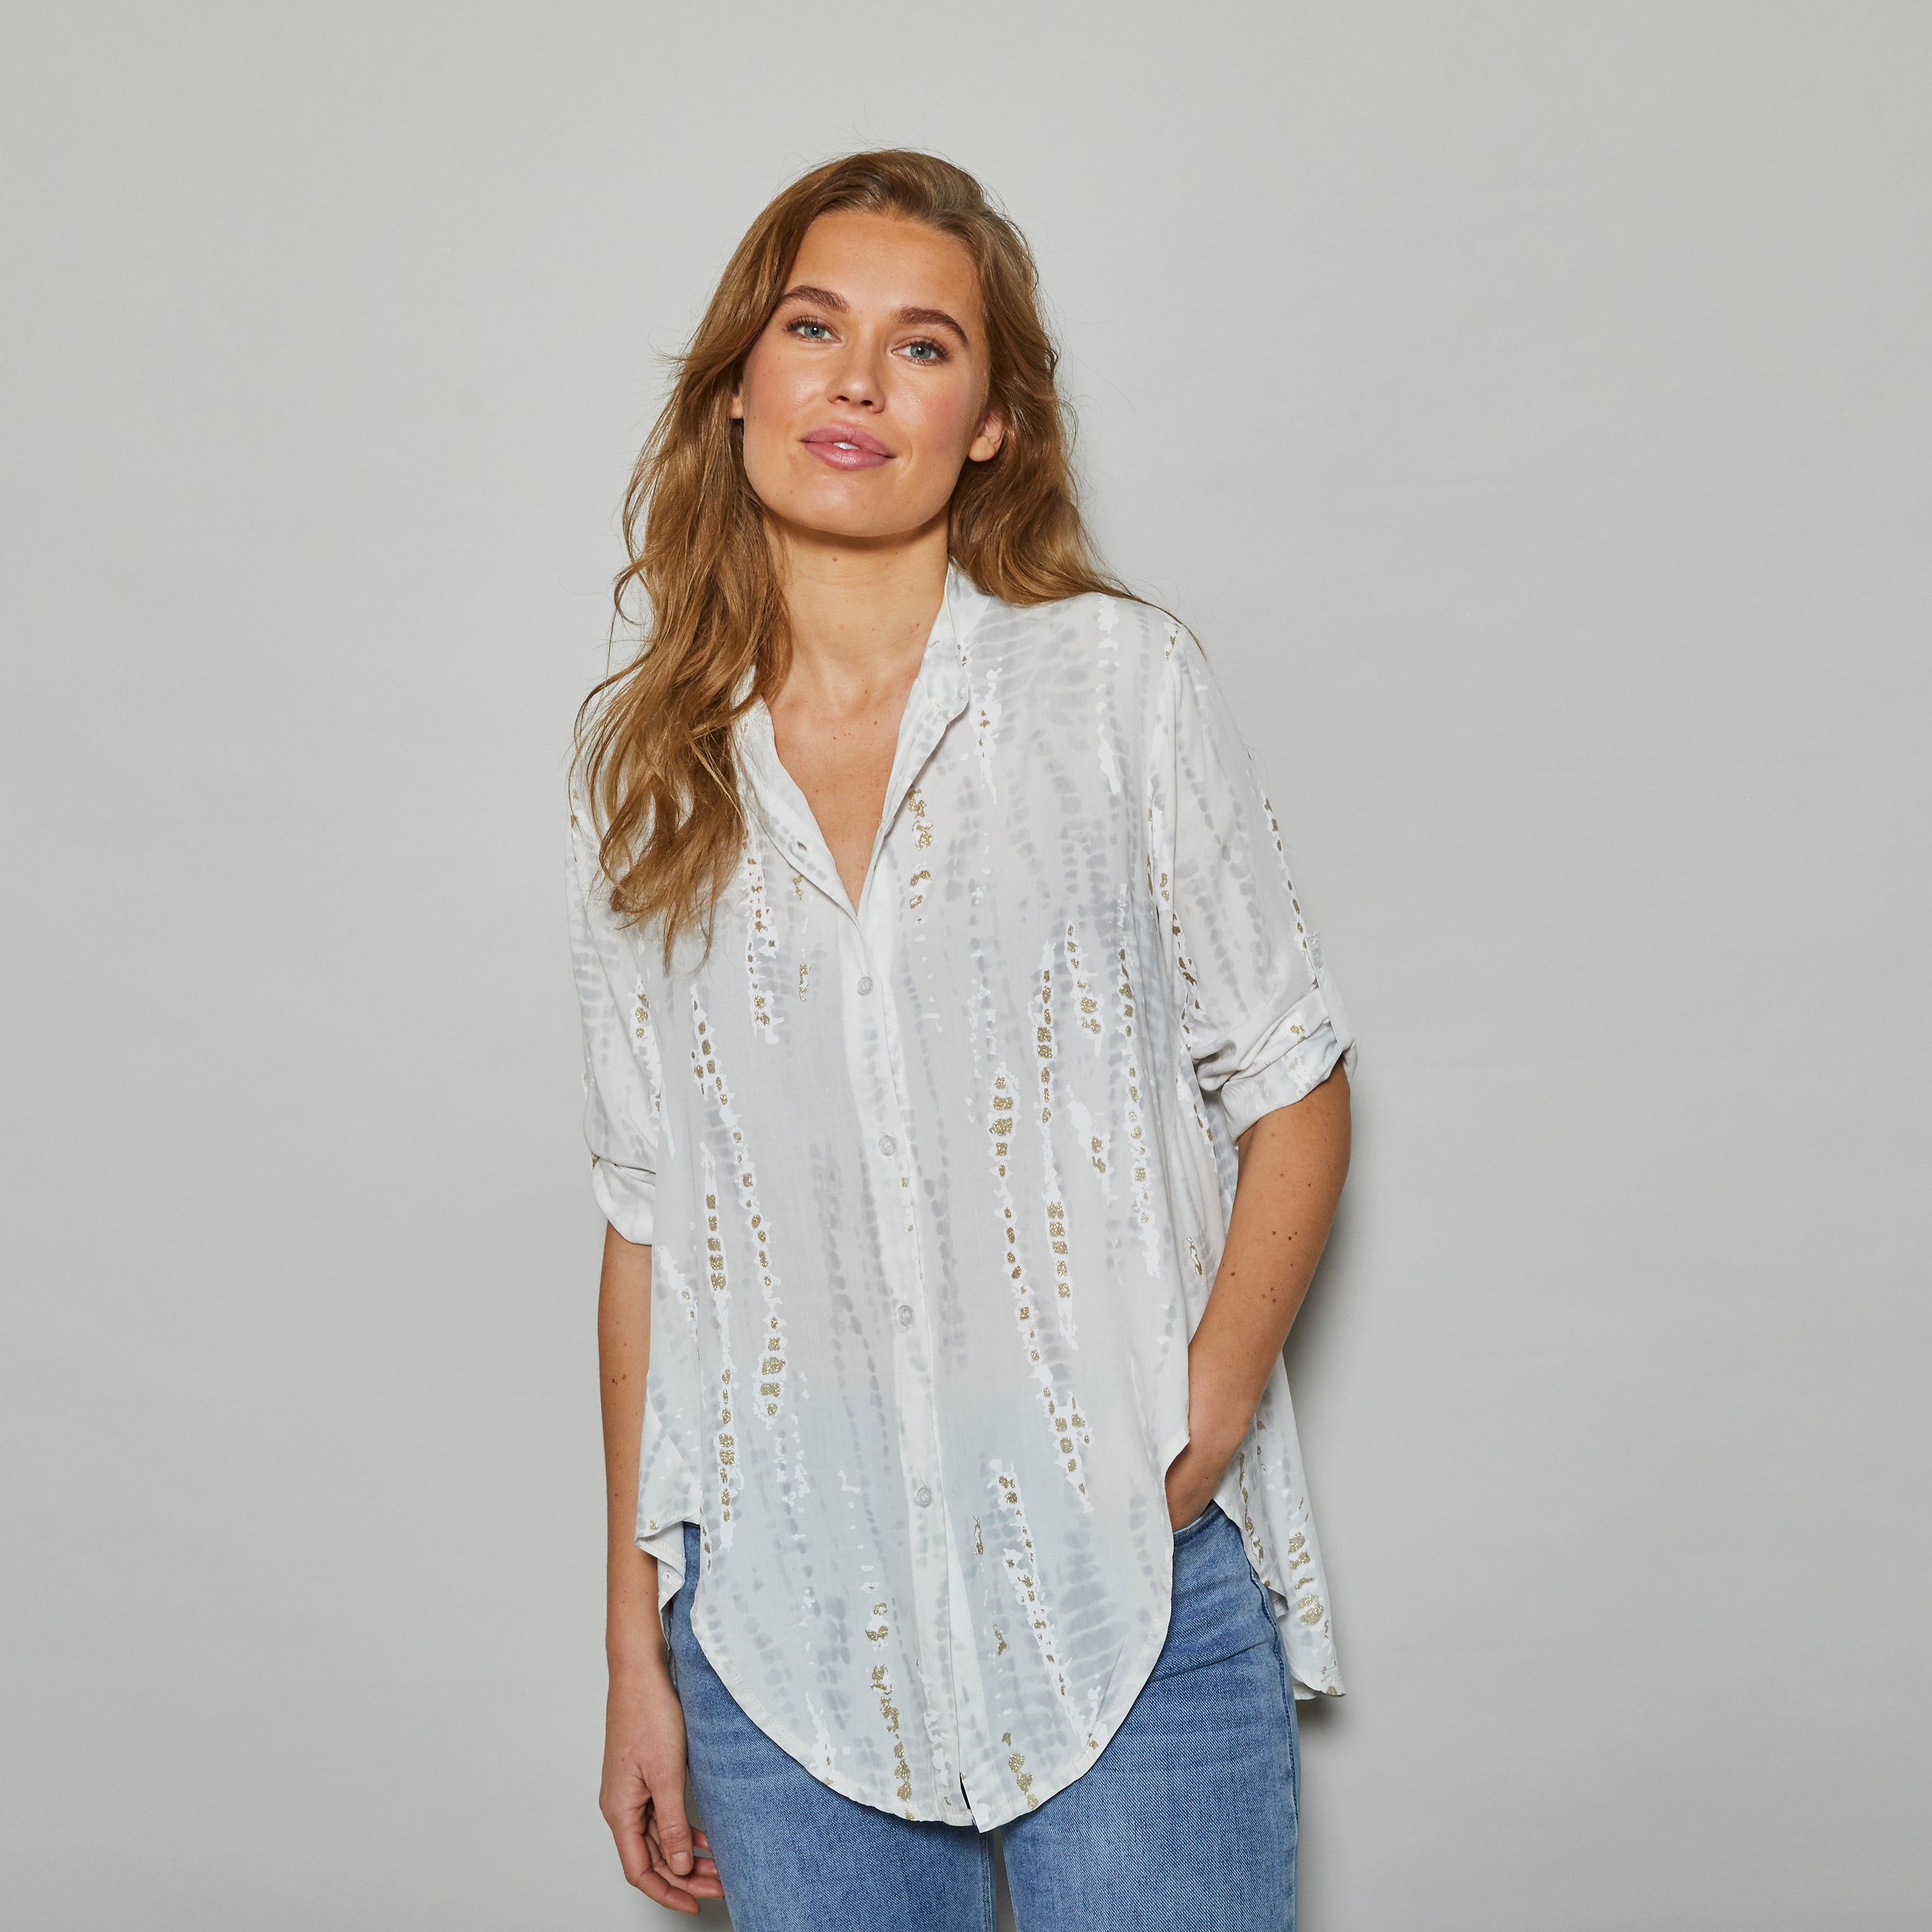 ALLWEEK Ghita 3/4 shirt Shirt Offwhite with grey and gold print